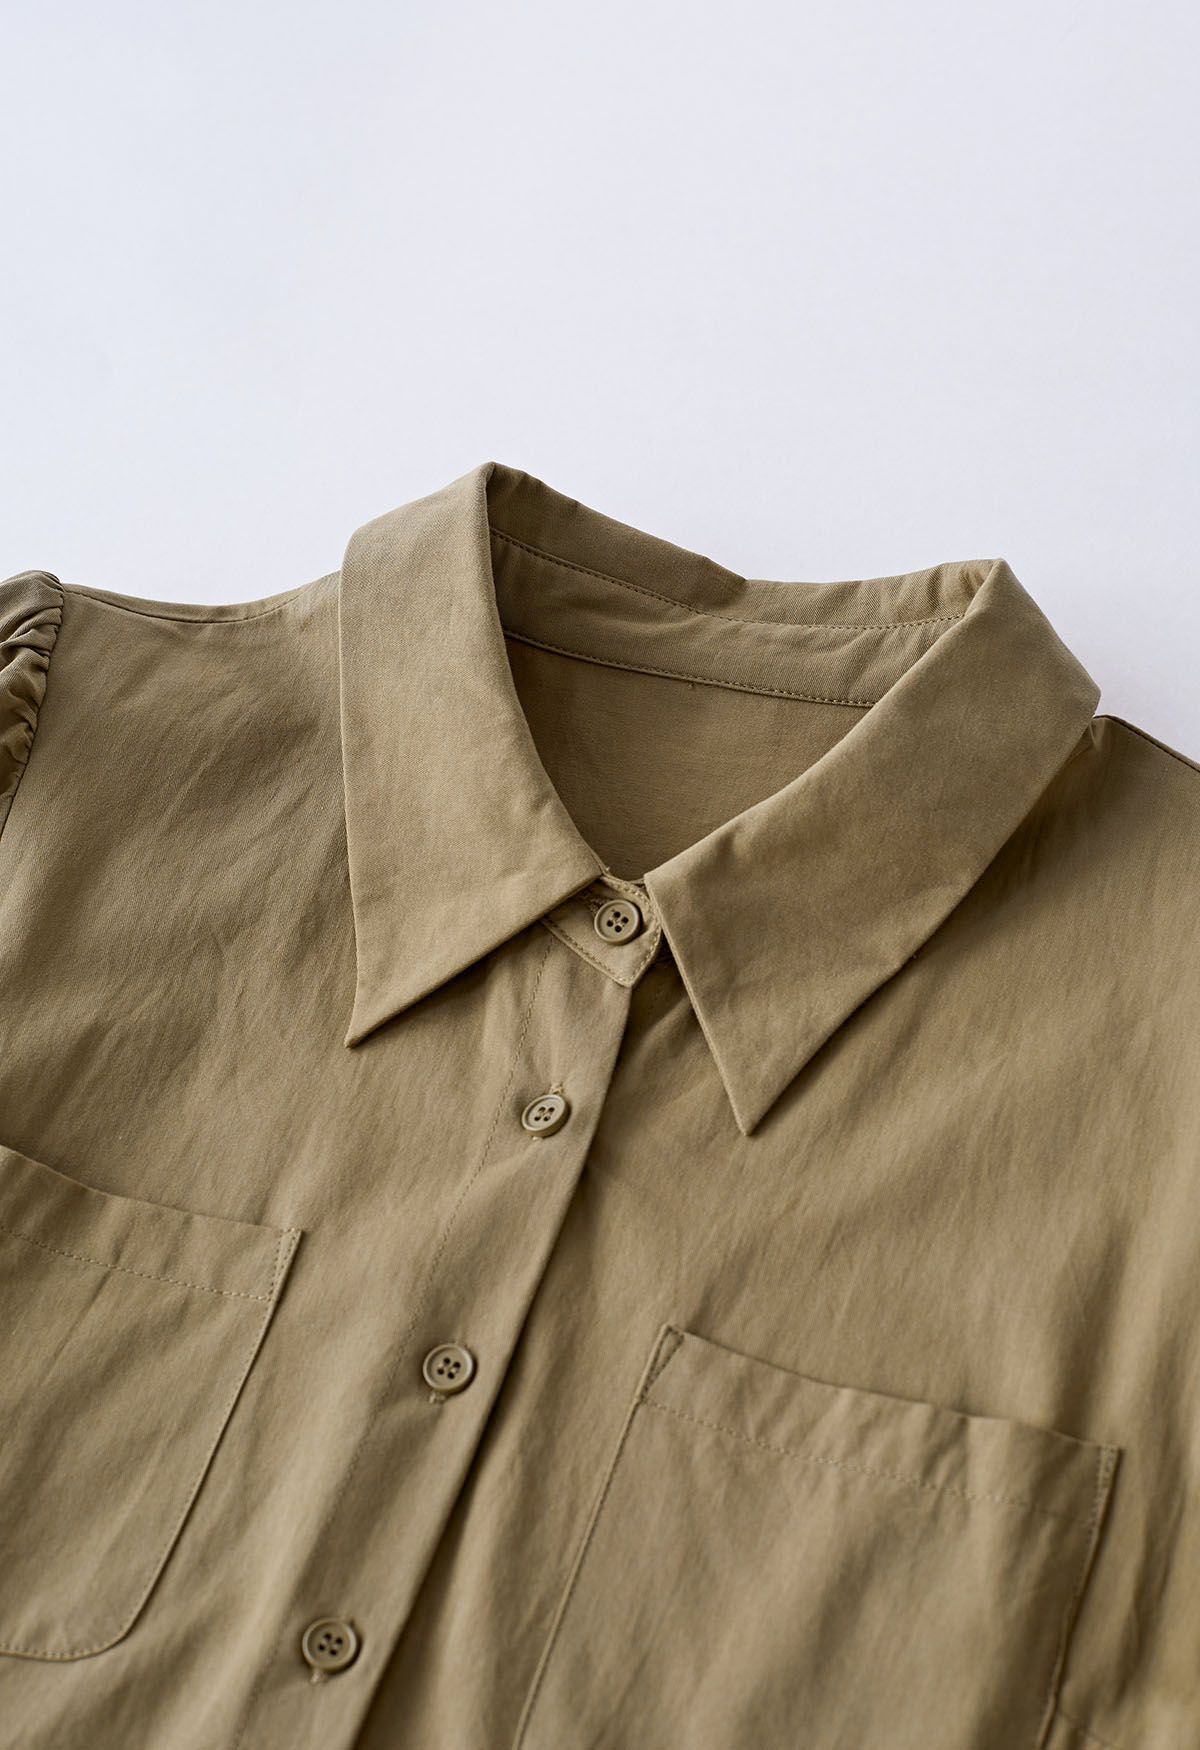 Patch Pocket Belted Cotton Shirt Dress in Khaki